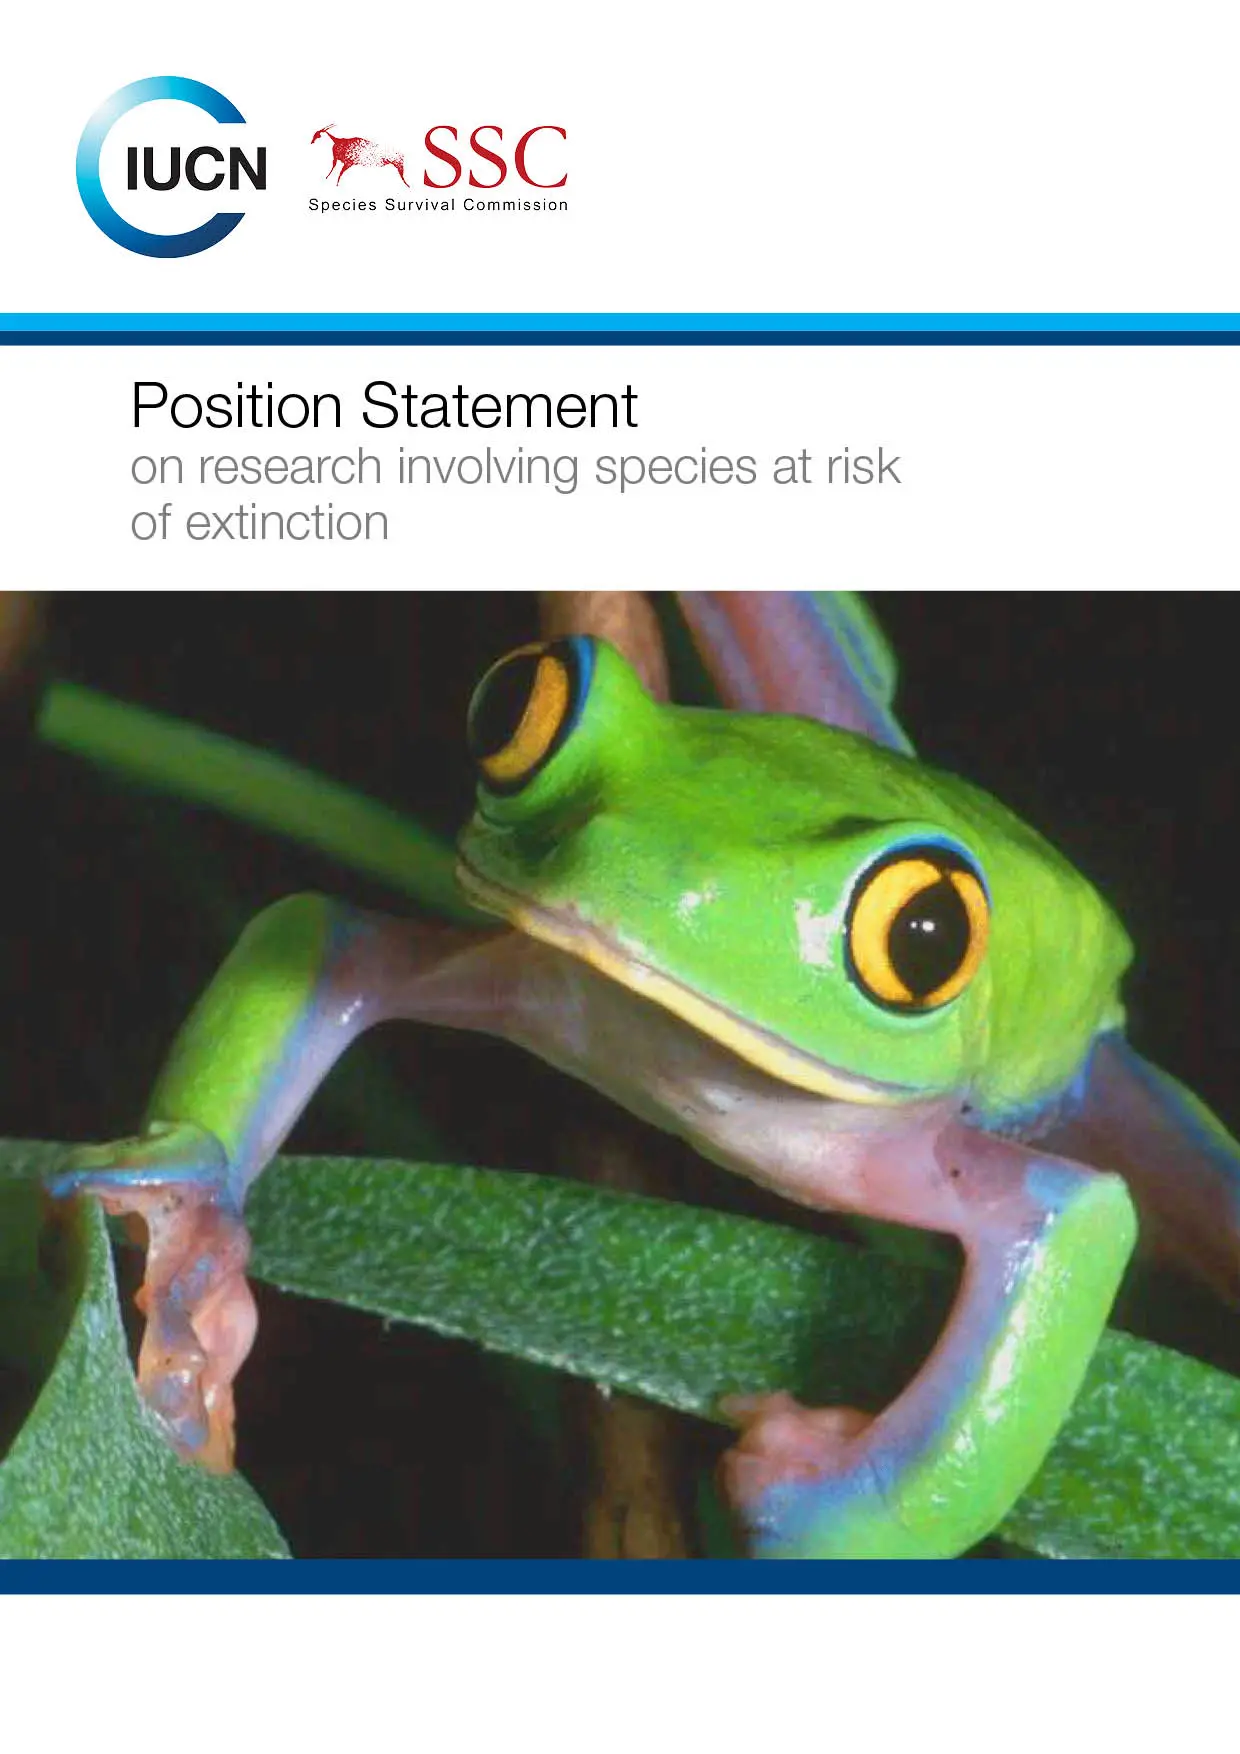 Position Statement on research involving species at risk of extinction